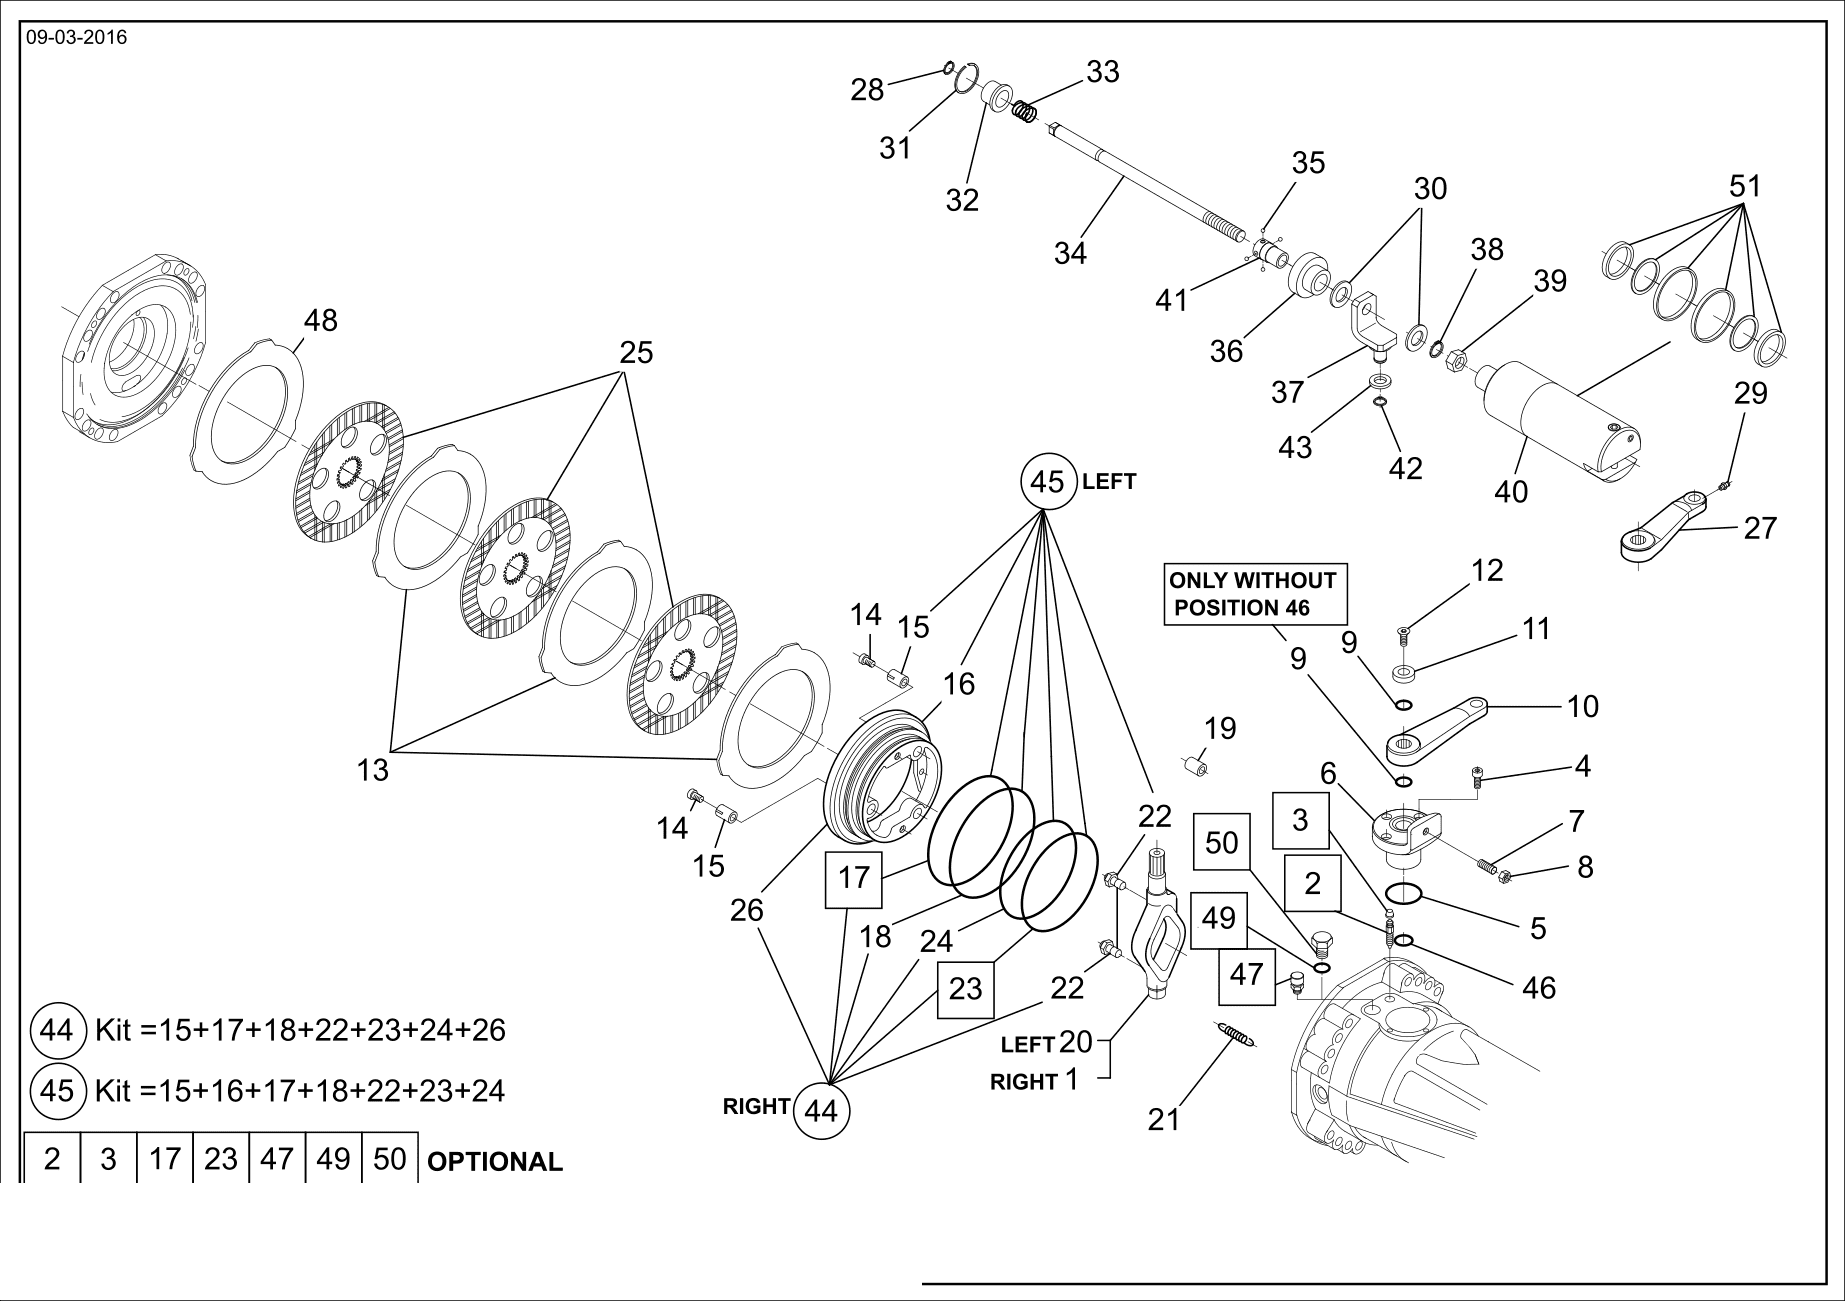 drawing for GHH 1202-0092 - O - RING (figure 4)